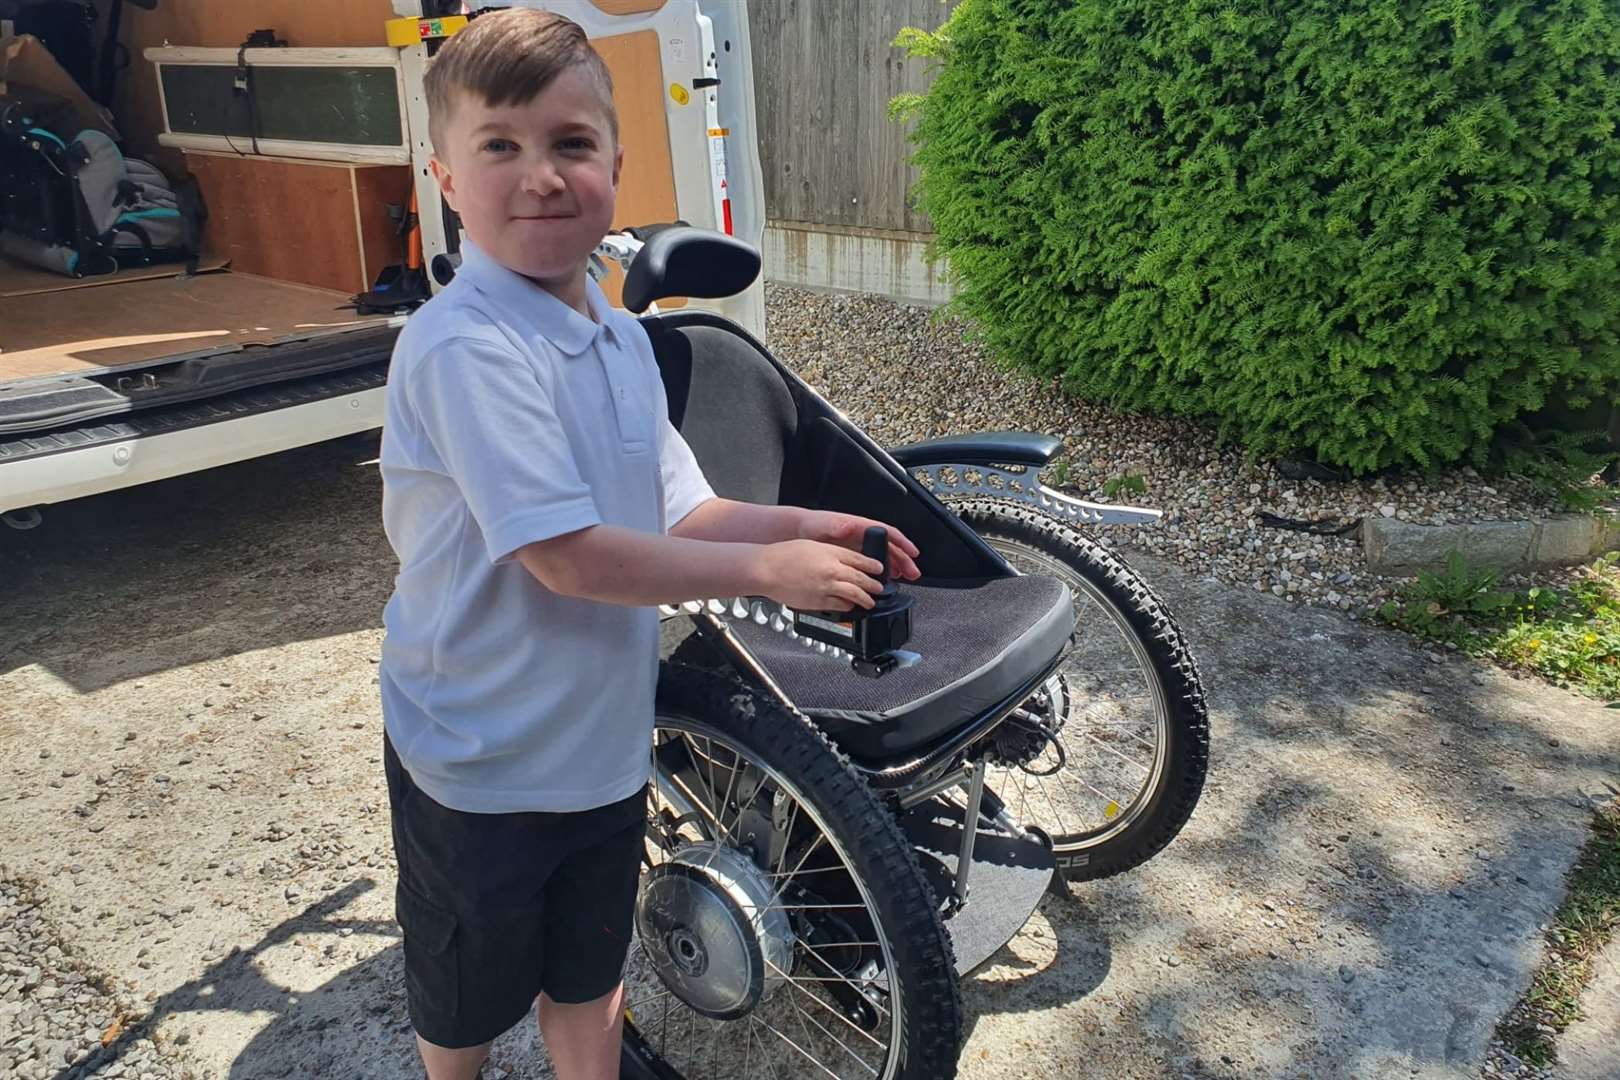 Henry's family have been fundraising for an electric wheelchair and thanks to supporters reached their target